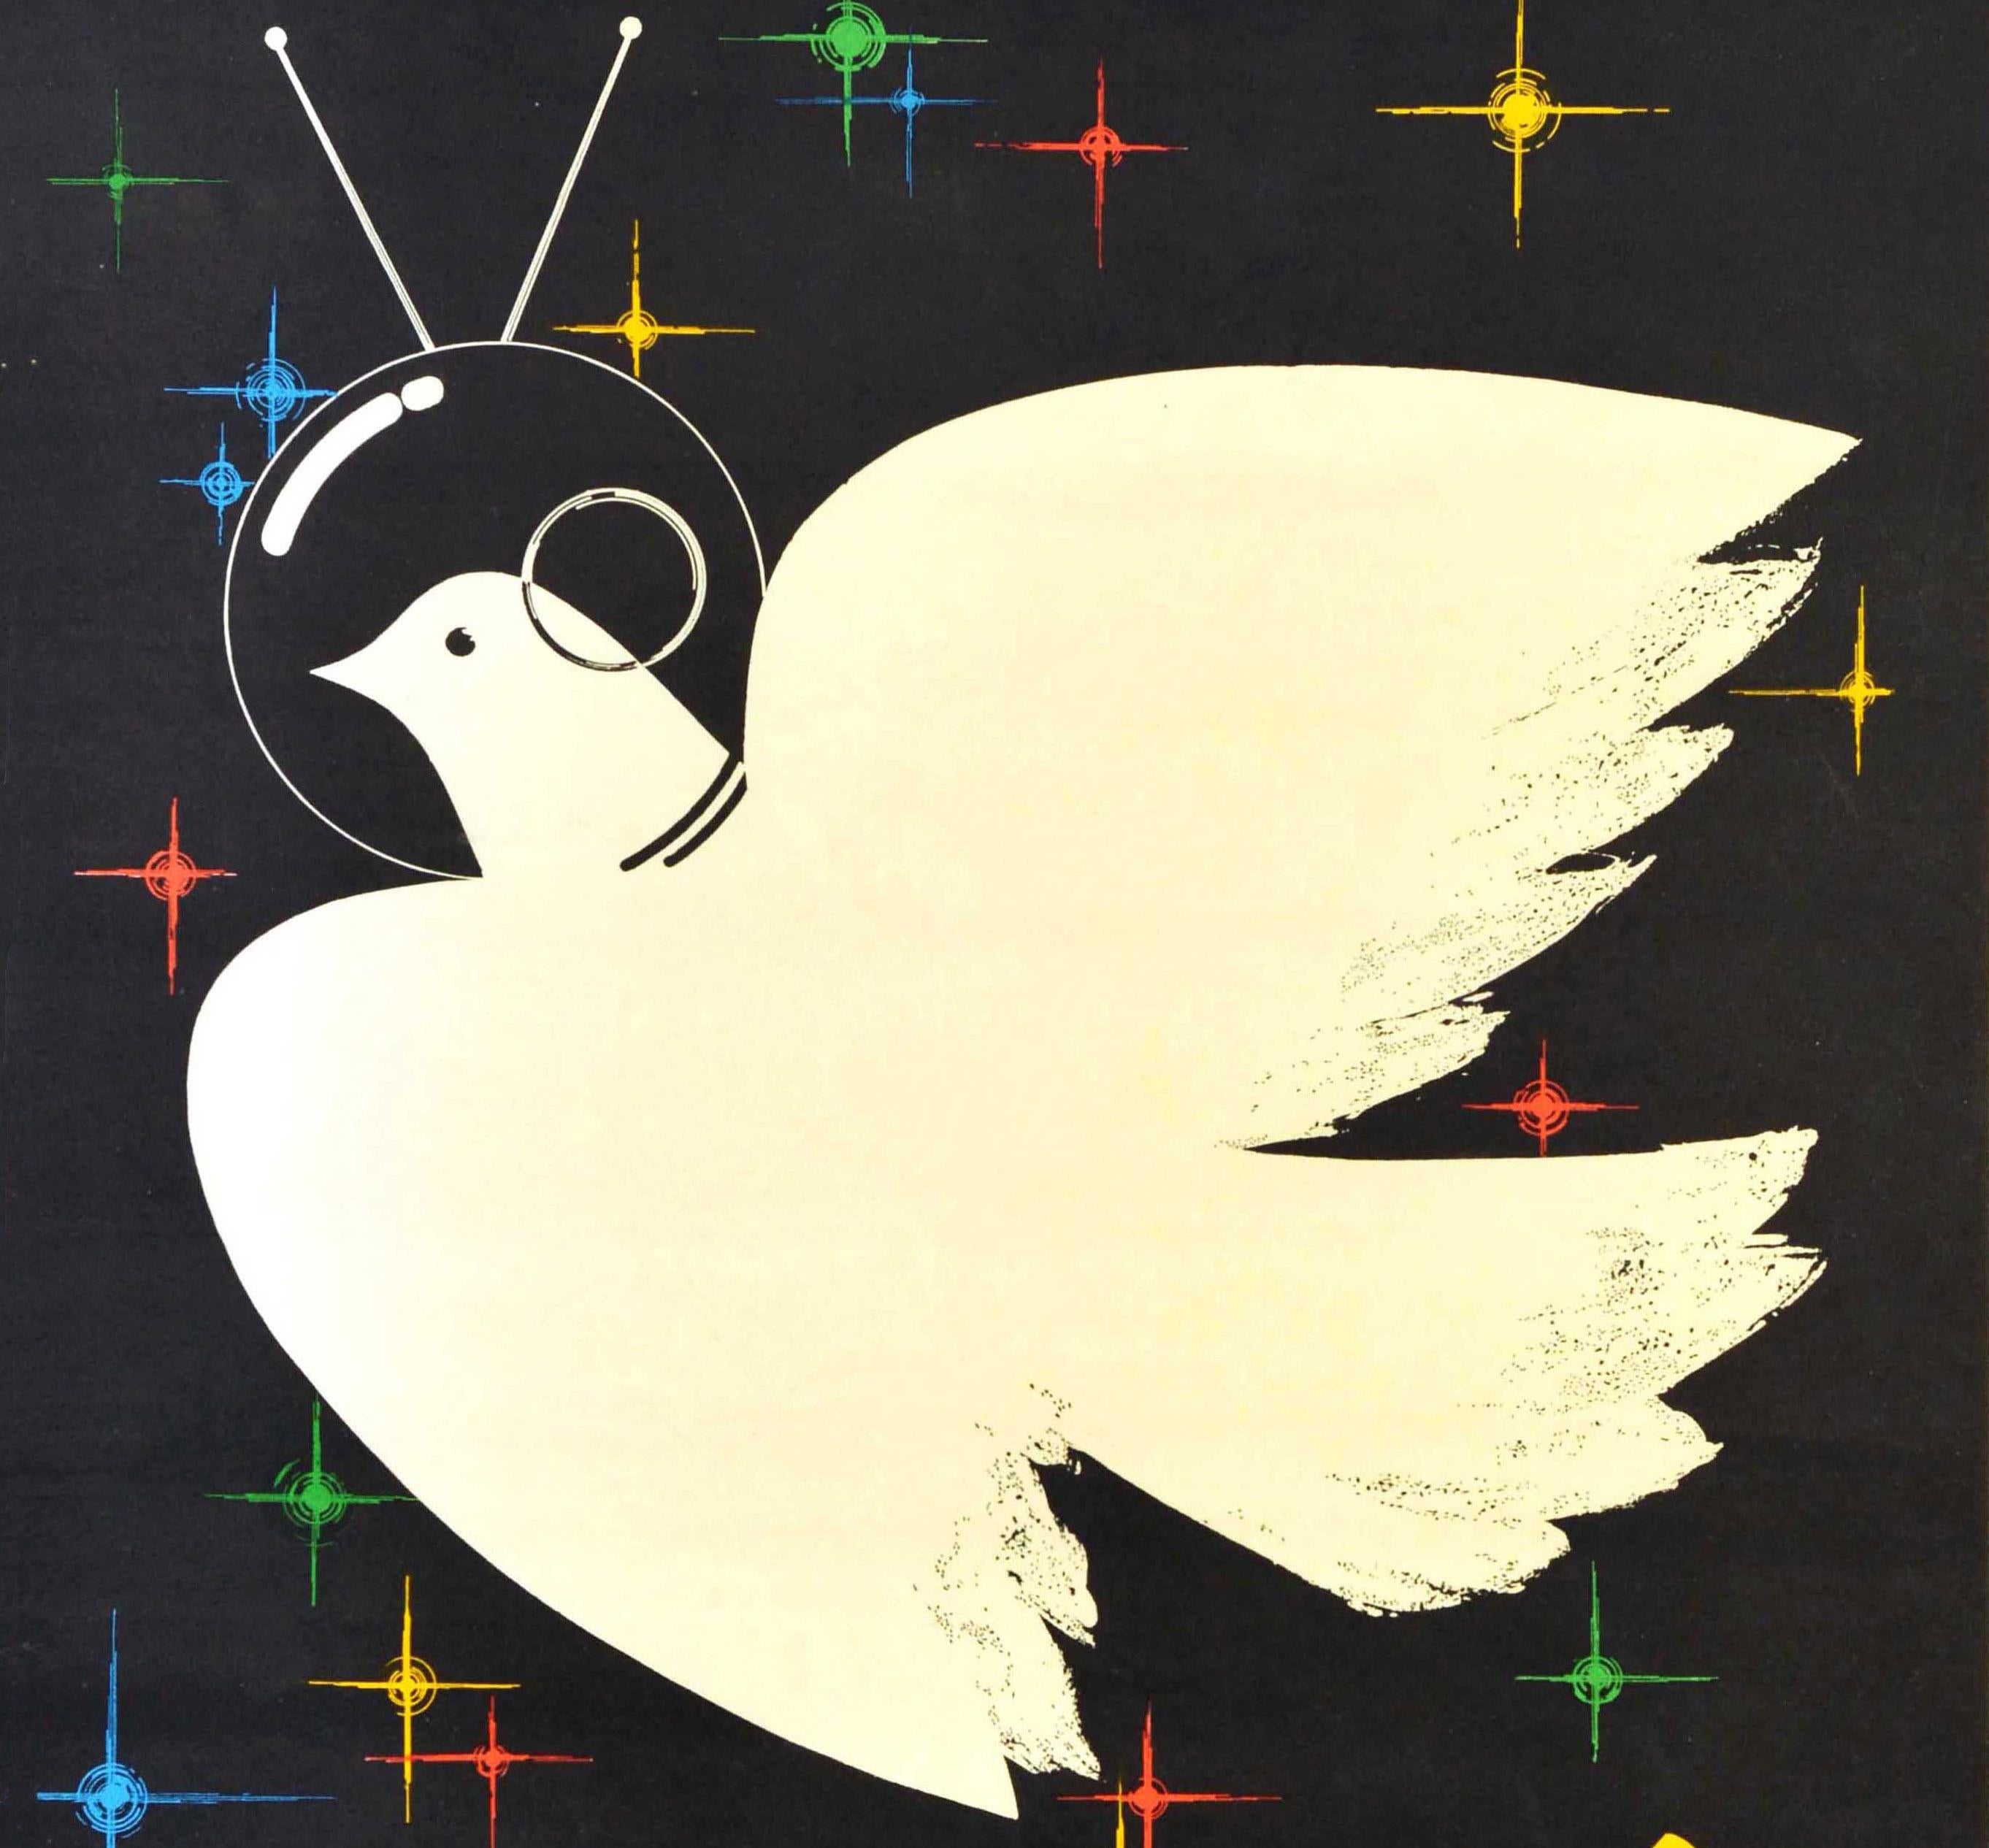 Original vintage Soviet space propaganda poster - ?! space is not for war-featuring a white dove of peace in a cosmonaut / astronaut helmet flying in front of colorful stars on the black background, a rainbow and the stylised text in yellow